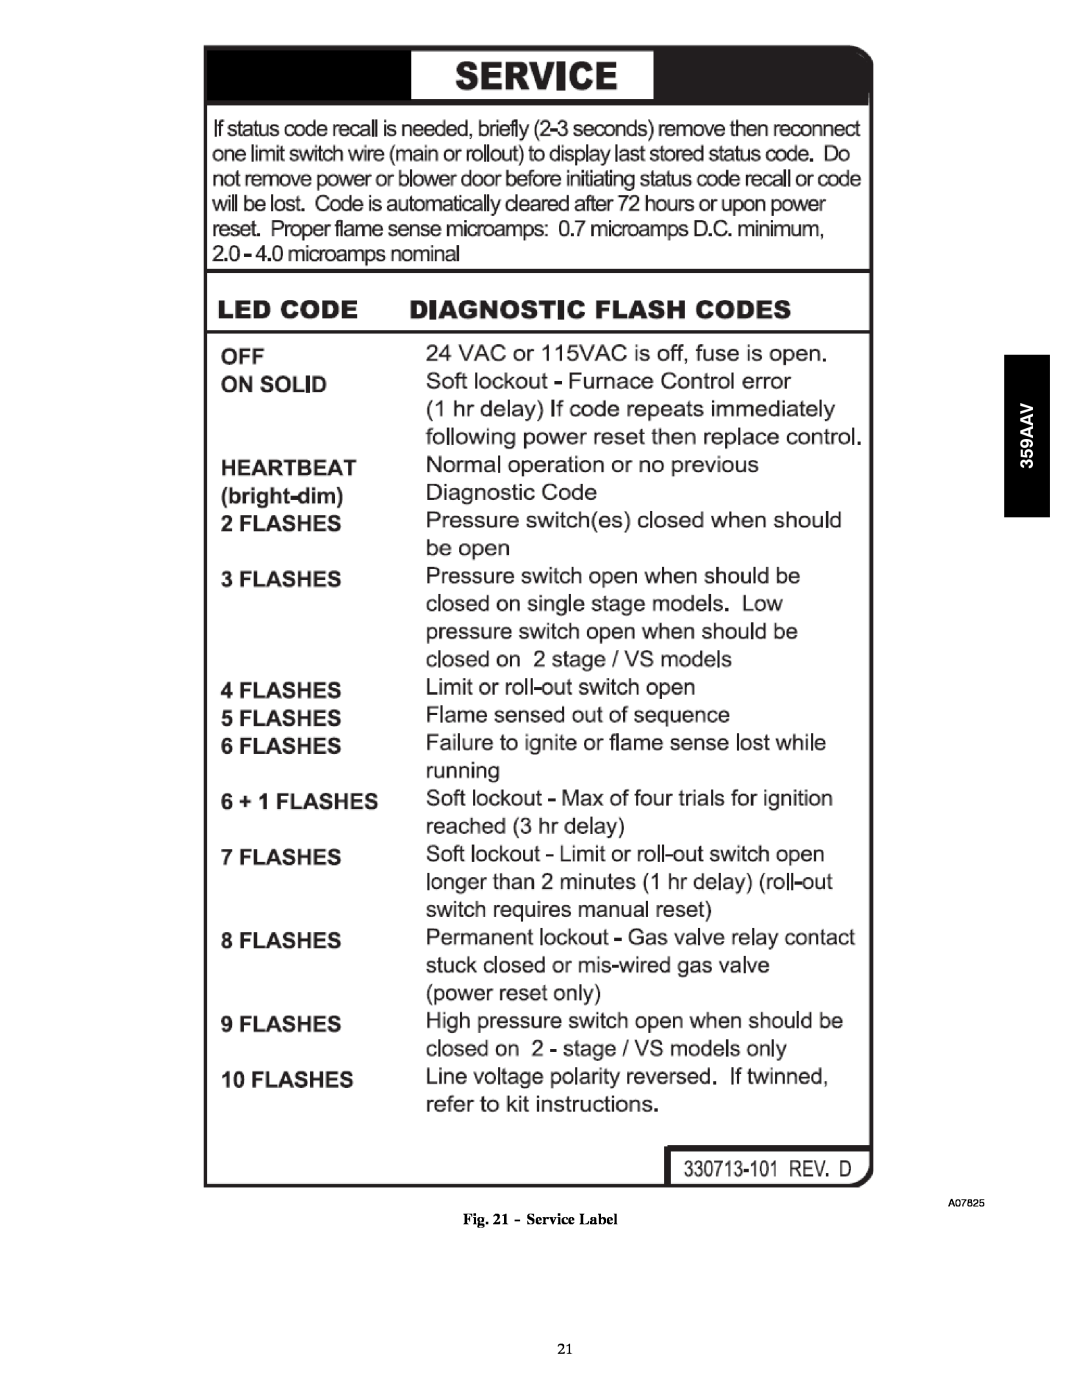 Bryant 359AAV instruction manual Service Label, A07825 